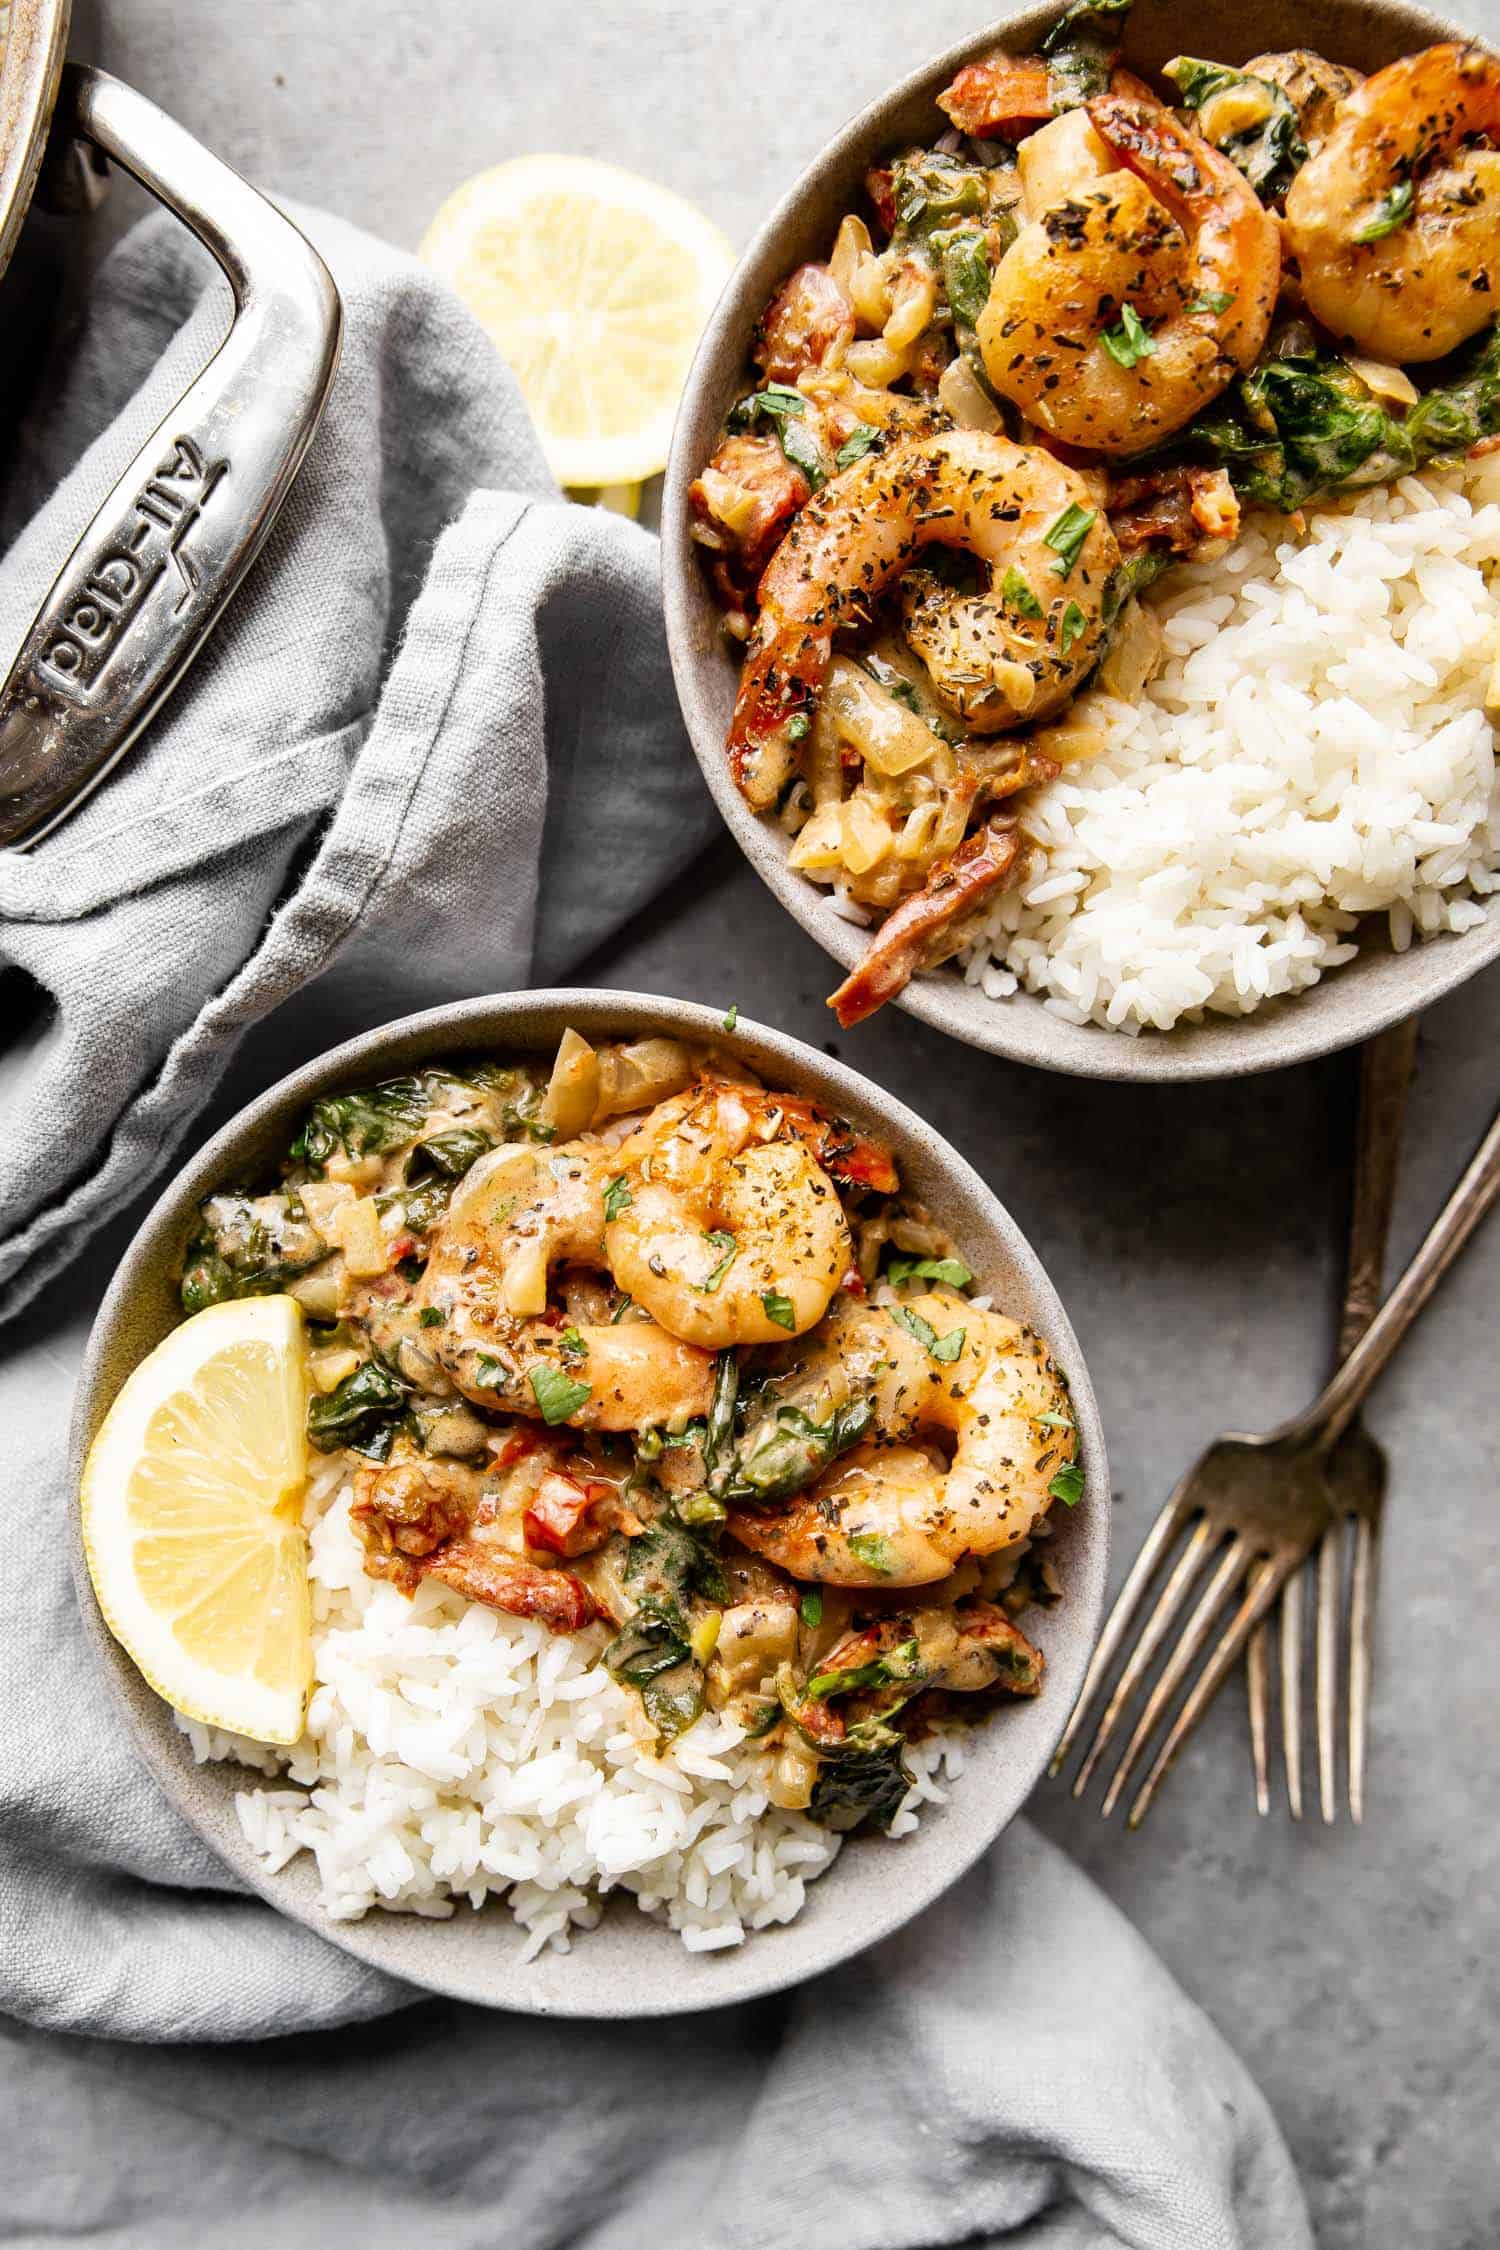 Cooked shrimp in a creamy sauce with rice and lemon